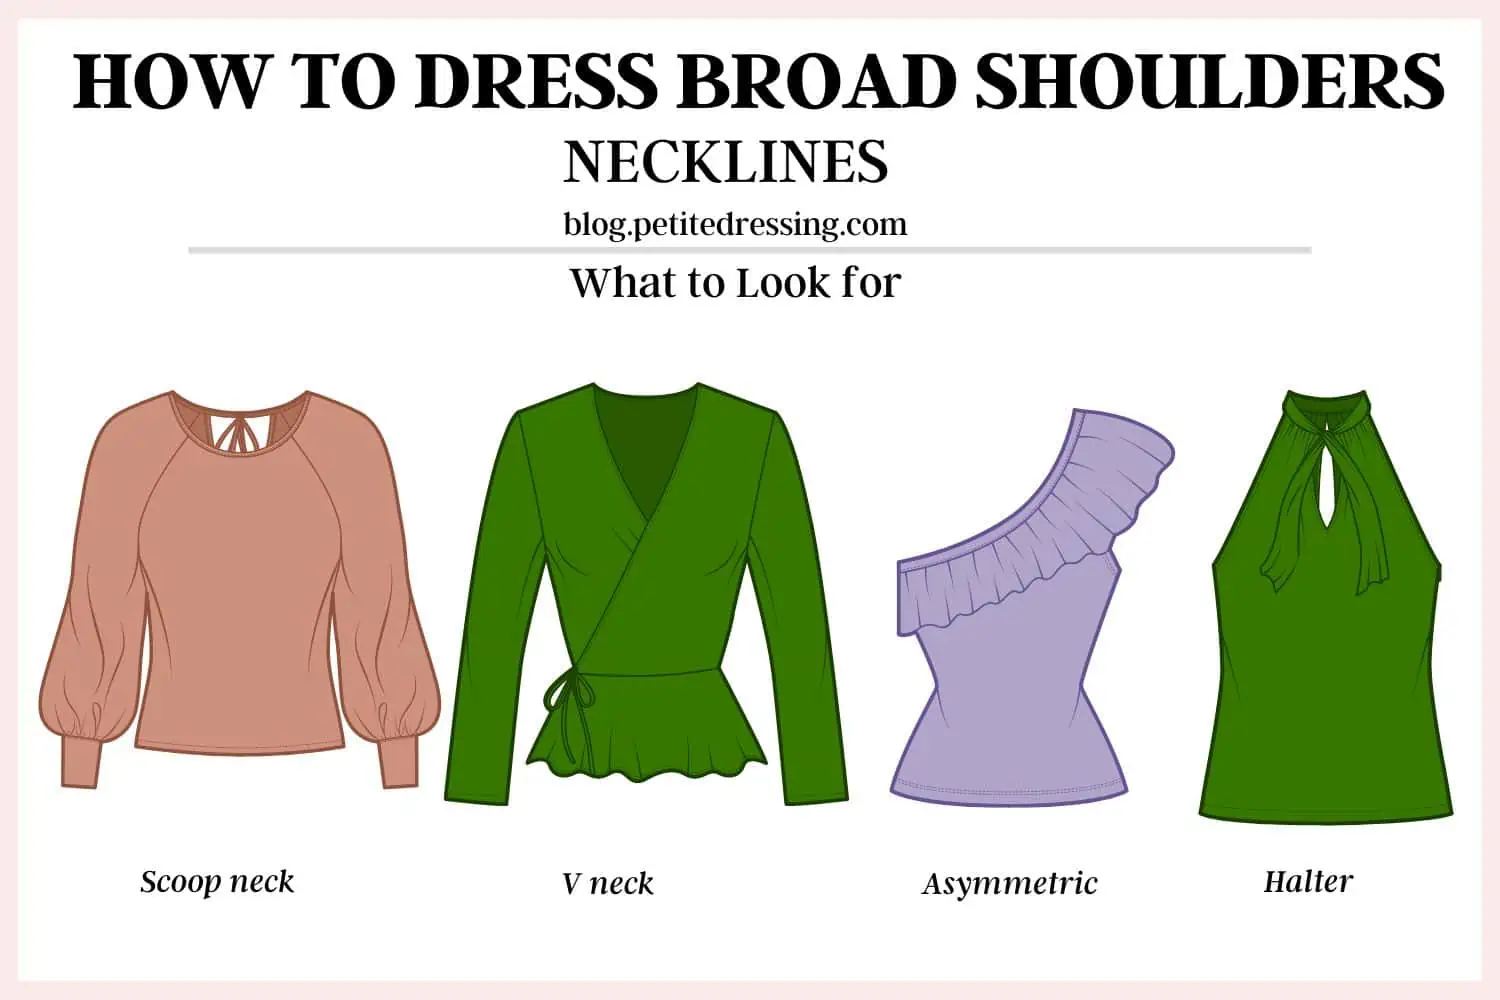 The Ultimate Guide To Finding The Best Neckline